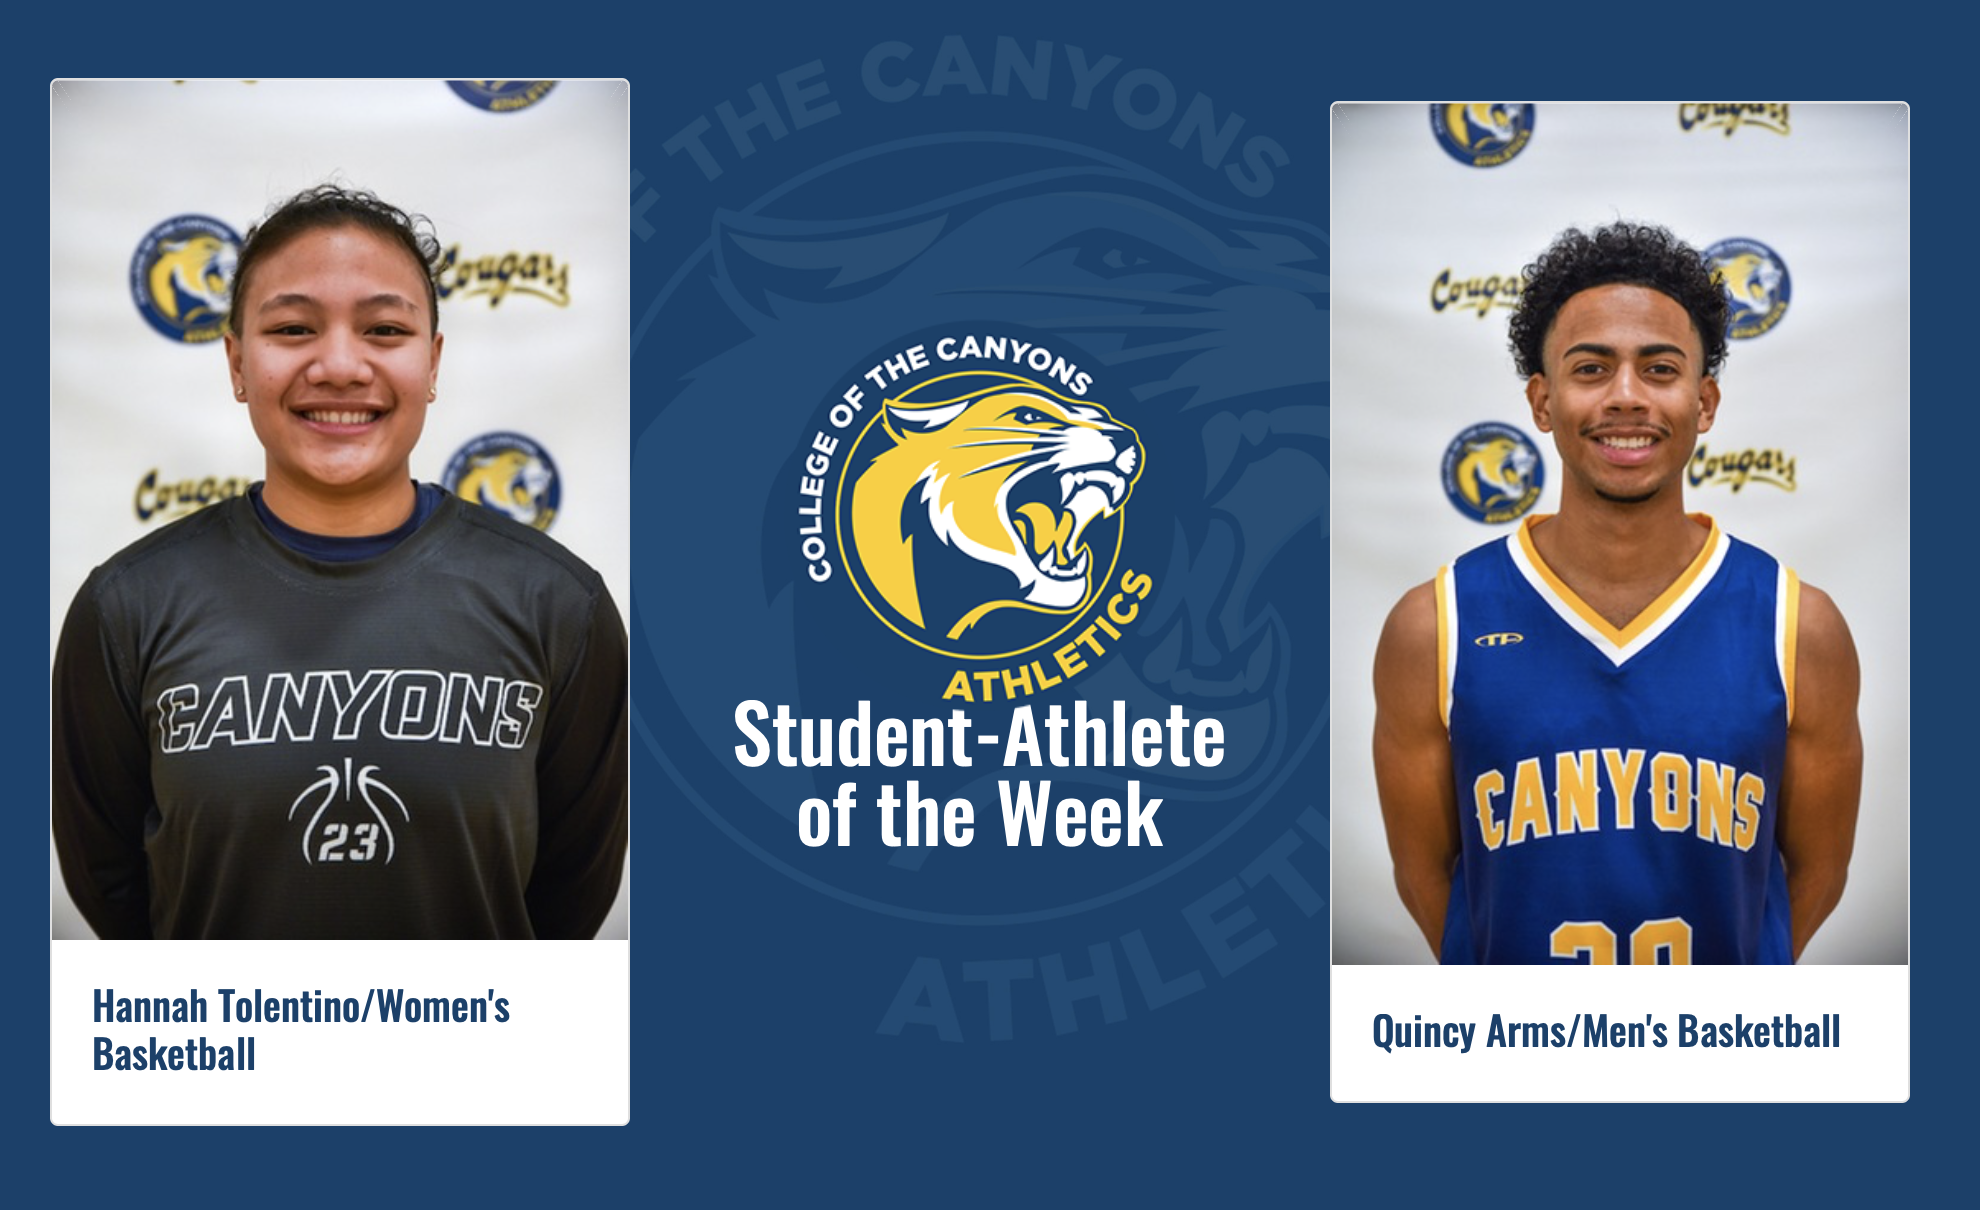 College of the Canyons Athlete of the Week graphic featuring Hannah Tolentino and Quincy Arms.